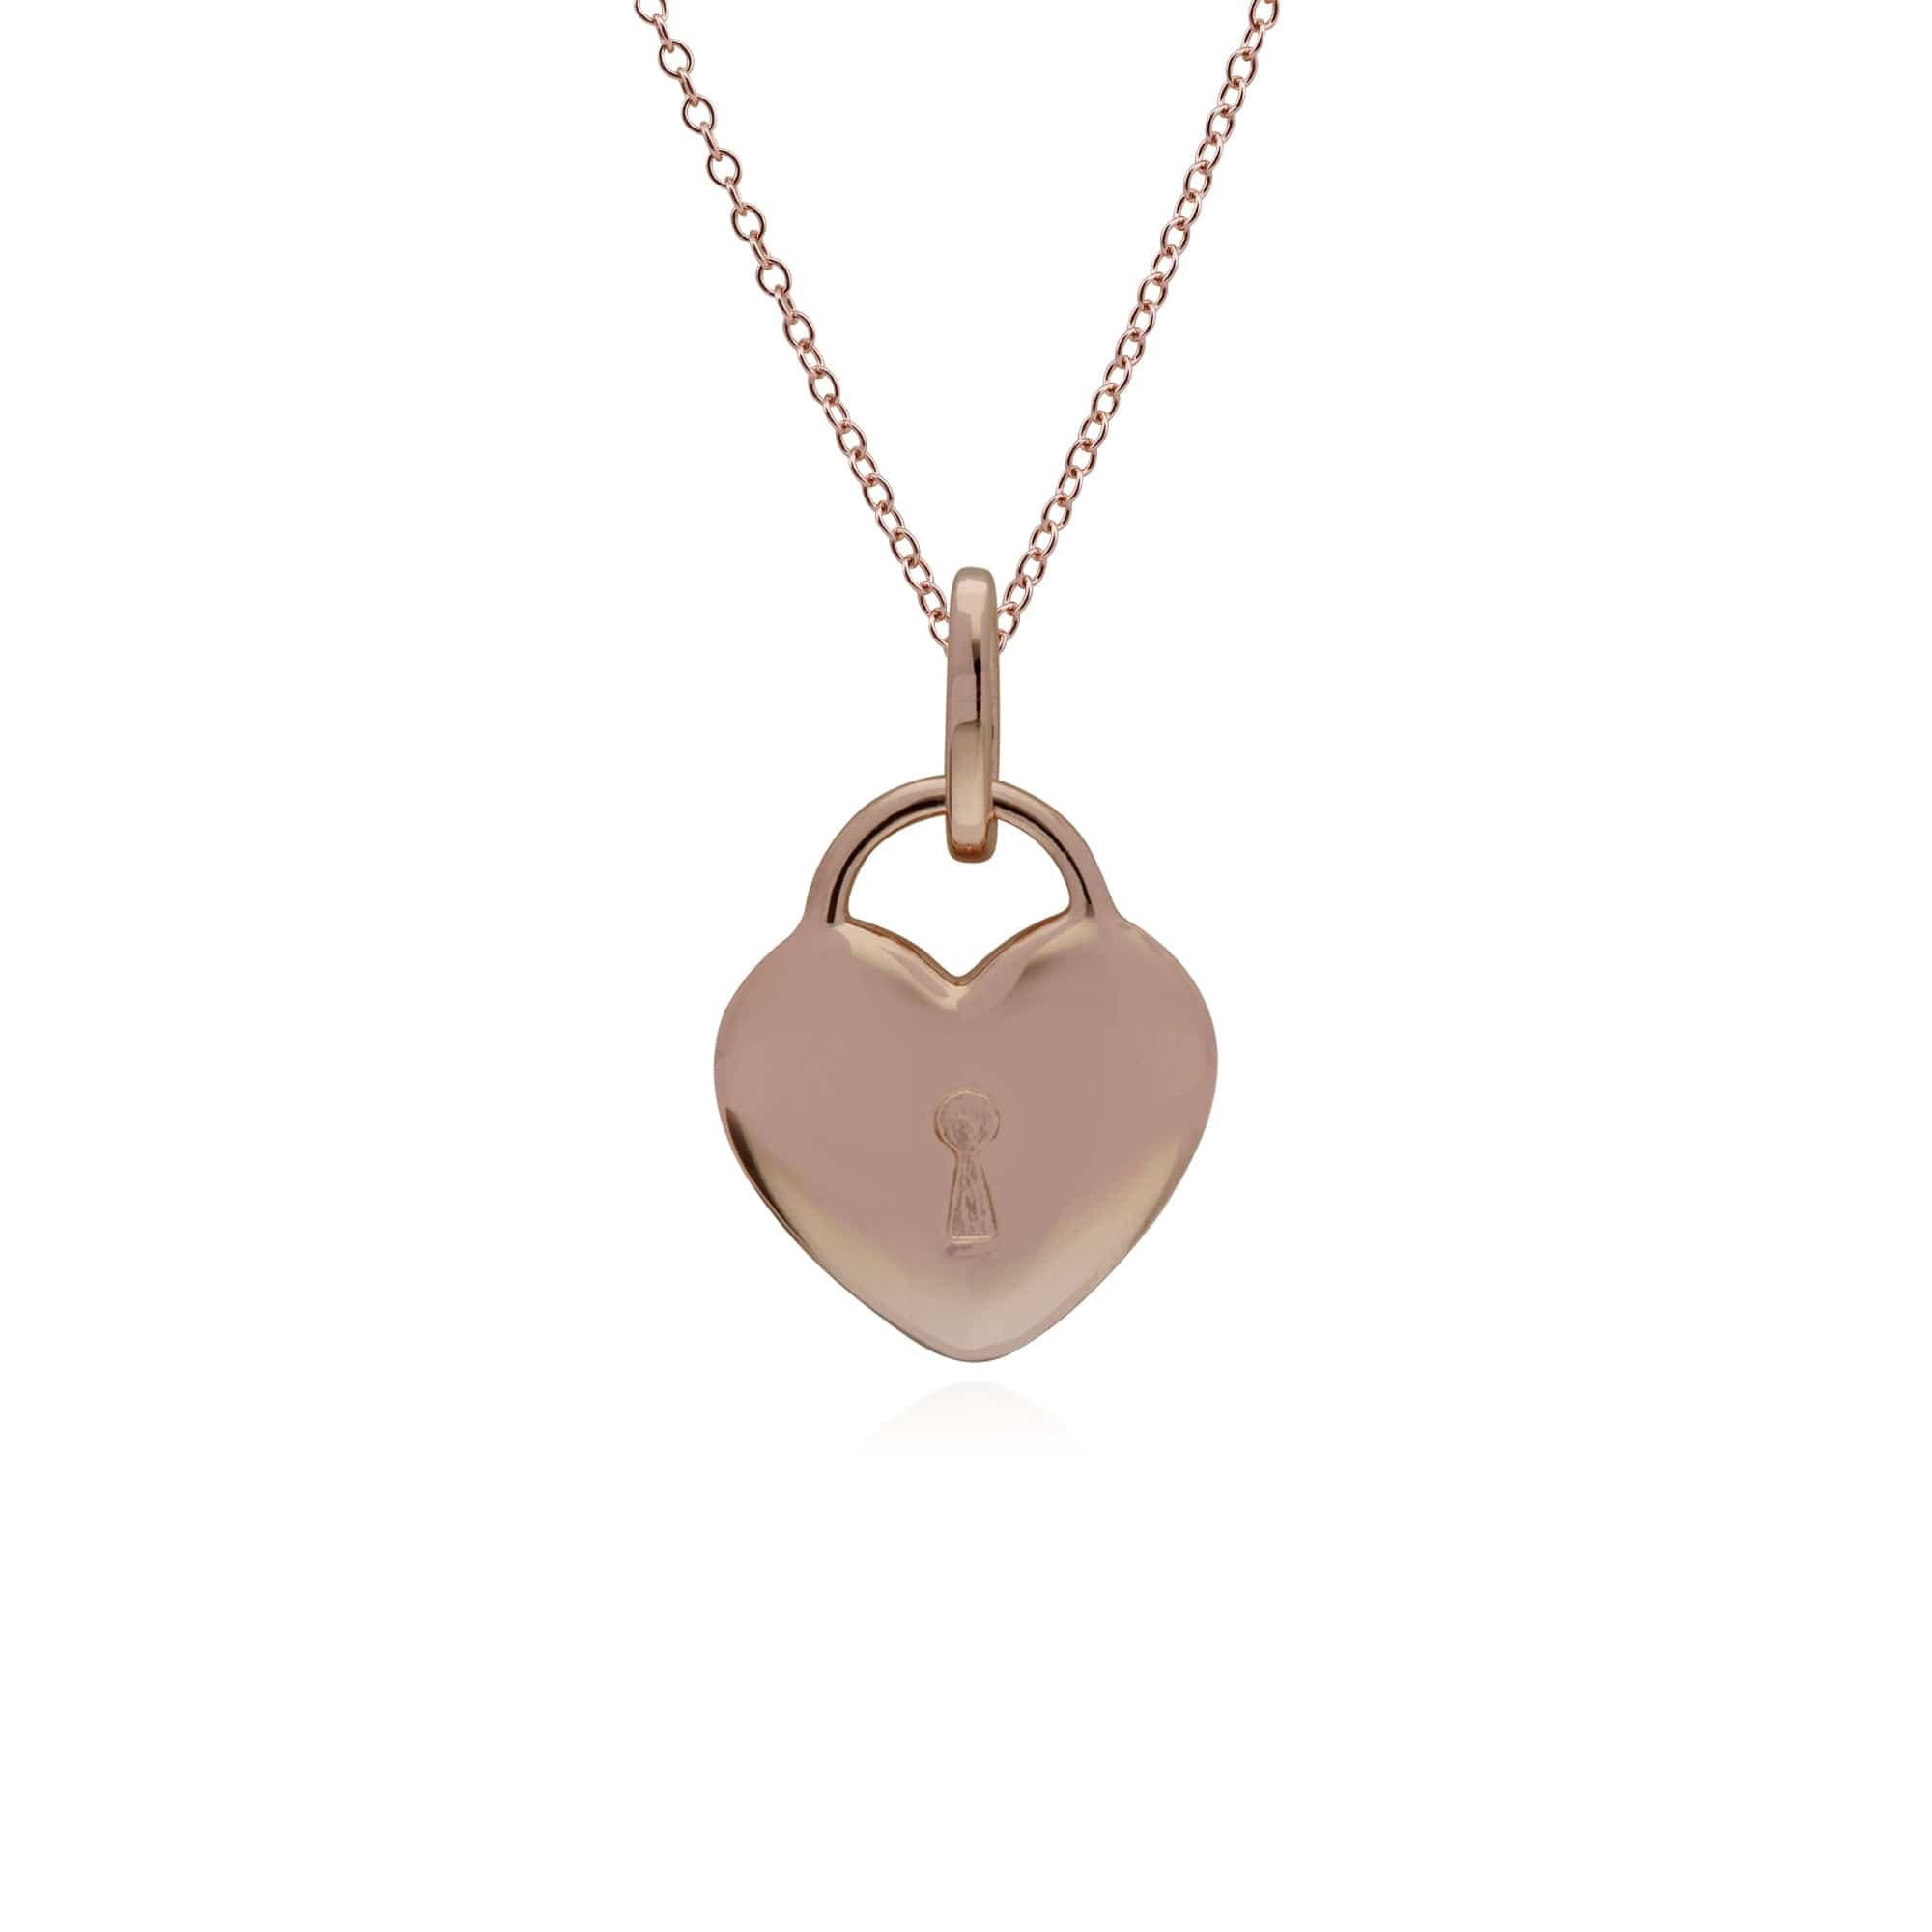 270P025903925-270P026901925 Classic Plain Heart Lock Pendant & Opal Charm in Rose Gold Plated 925 Sterling Silver 3